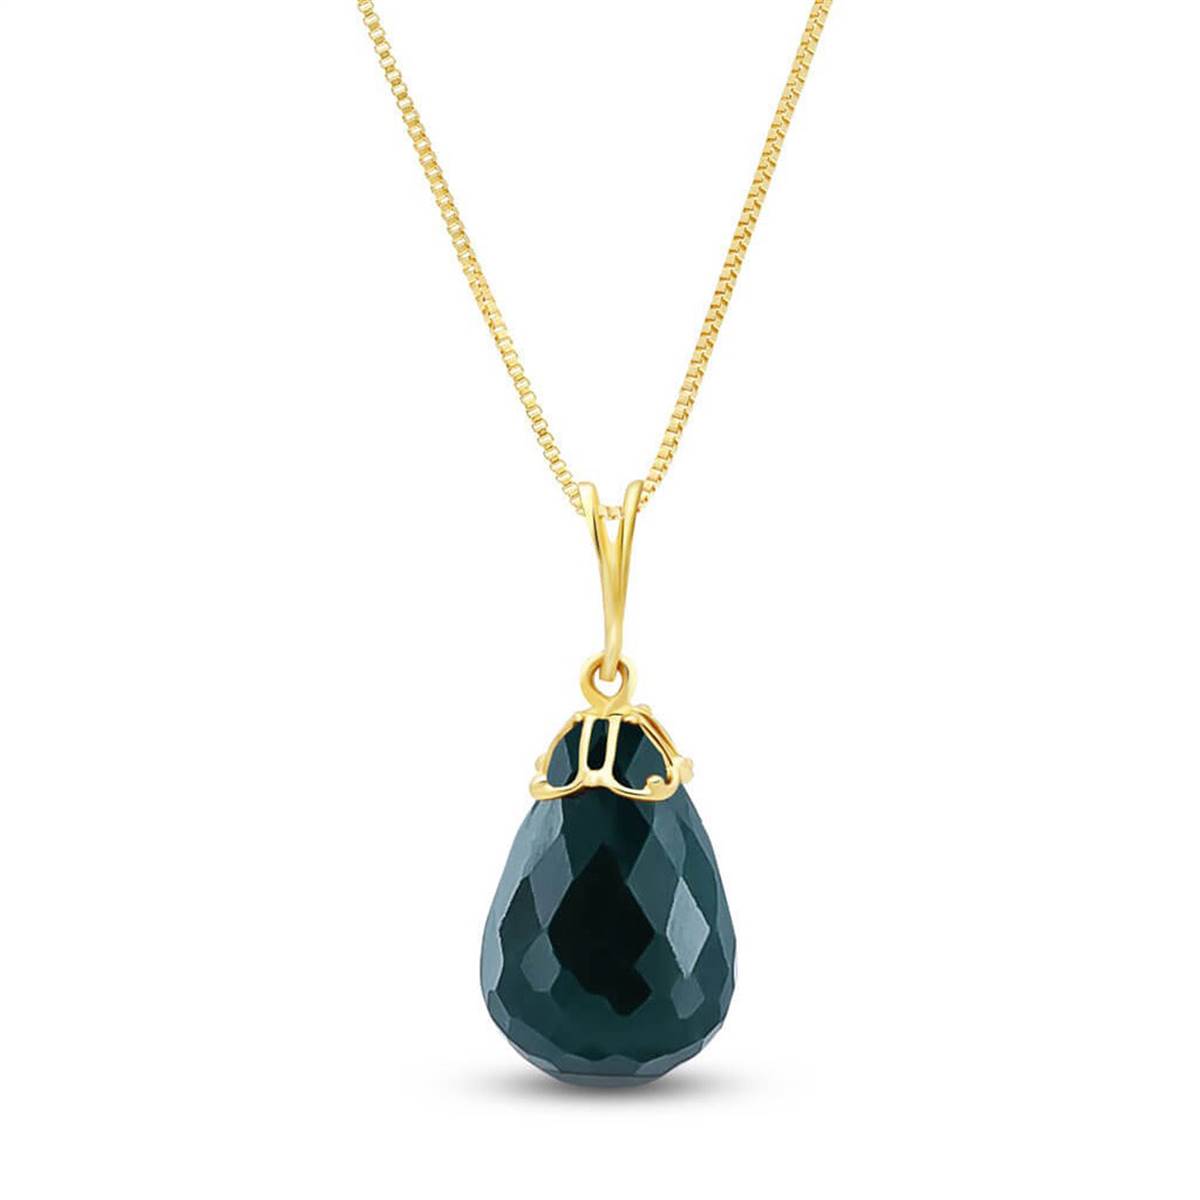 14.8 Carat 14K Solid Yellow Gold Necklace Briolette Natural Emerald